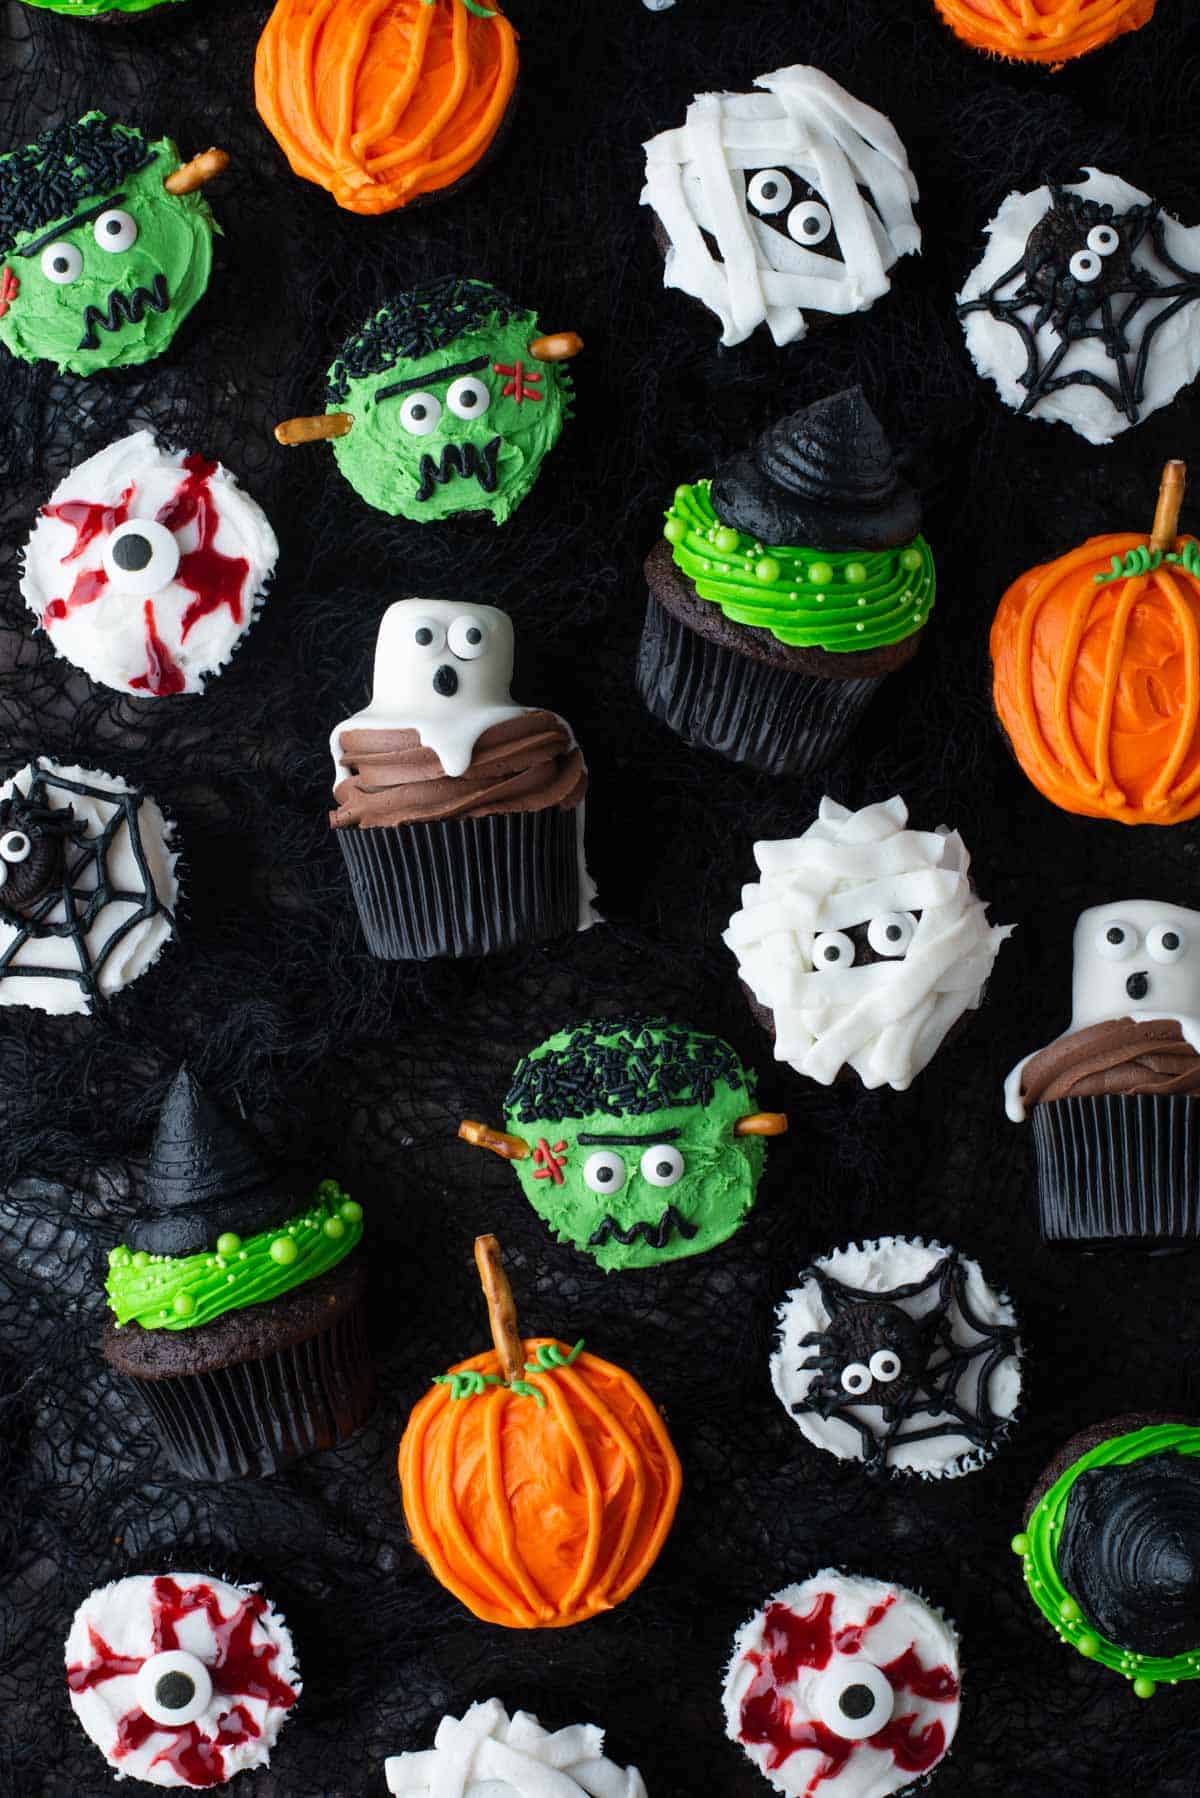 an assortment of halloween cupcakes including mummy cupcakes, pumpkin cupcakes, frankenstein cupcakes, spider web cupcakes, ghost cupcakes and witch hat cupcakes